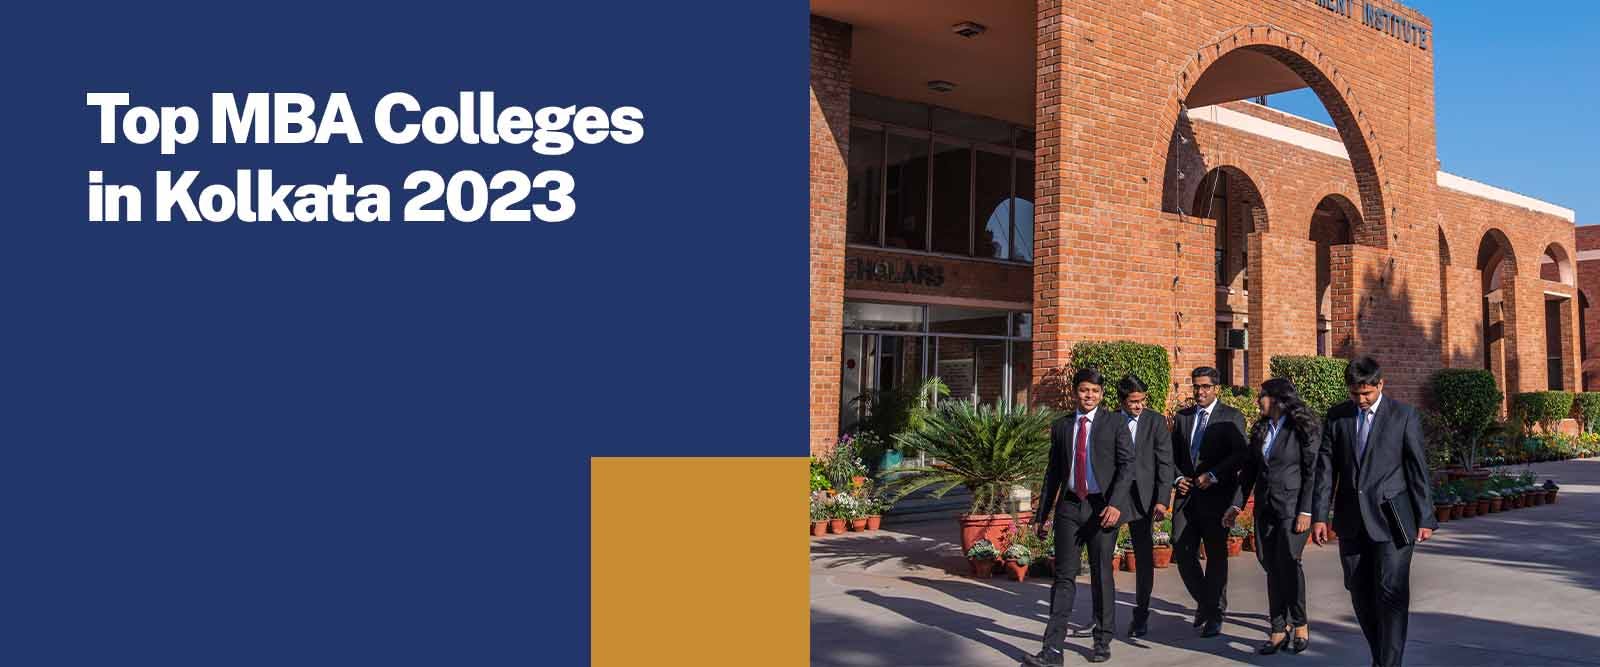 Top MBA Colleges in Kolkata 2023